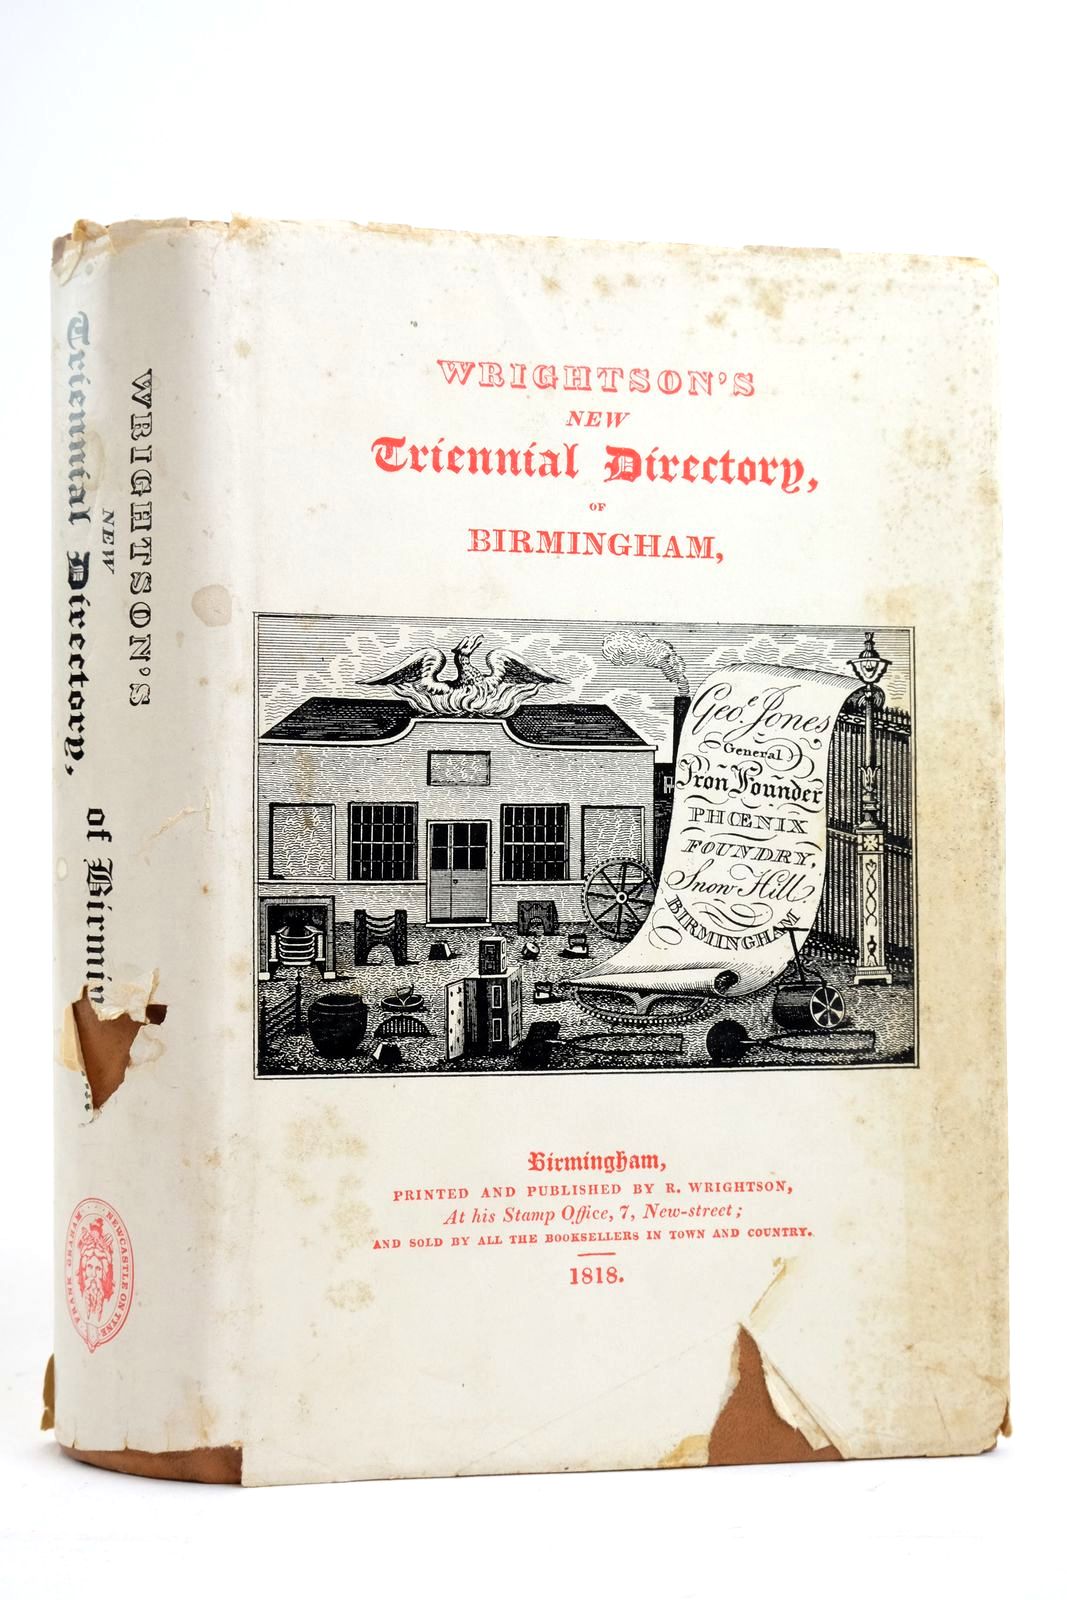 Photo of WRIGHTON'S NEW TRIENNIAL DIRECTORY OF BIRMINGHAM 1818 published by Frank Graham (STOCK CODE: 2136093)  for sale by Stella & Rose's Books